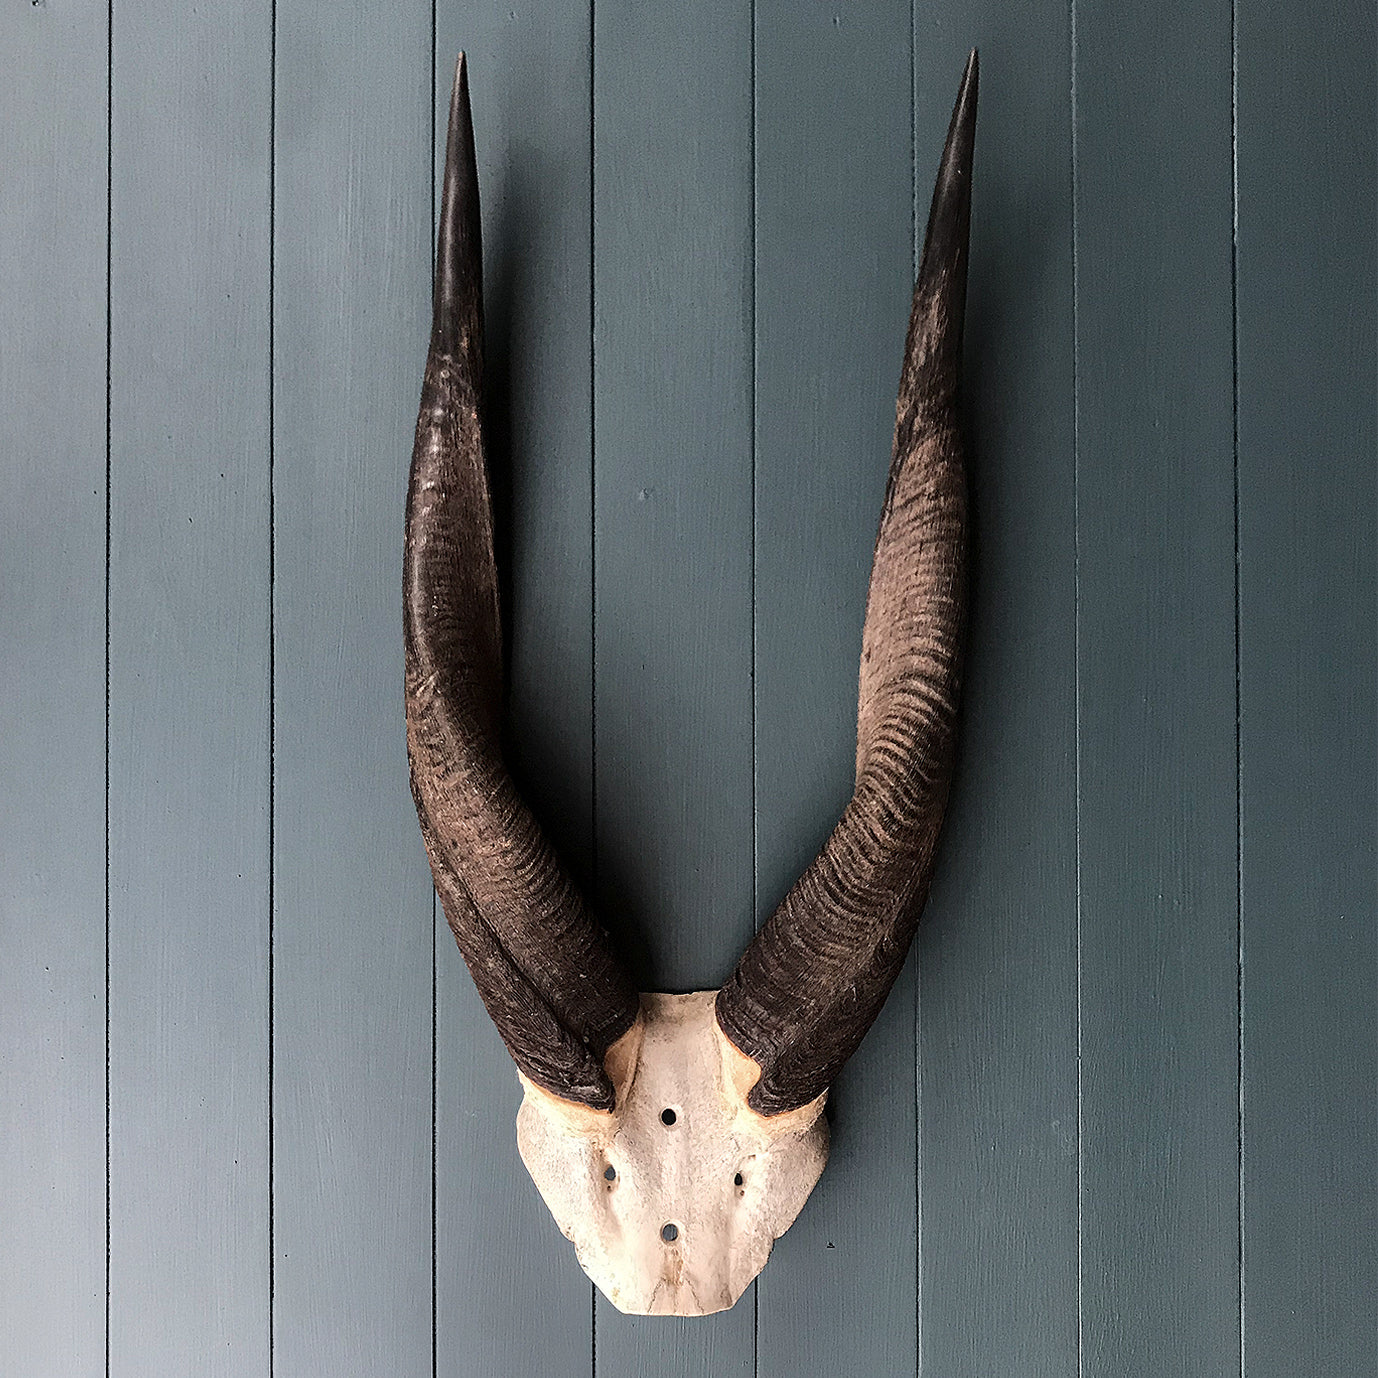 Vintage African Horns. Find this and other Beautiful Vintage items for you home at Intovintage.co.uk.